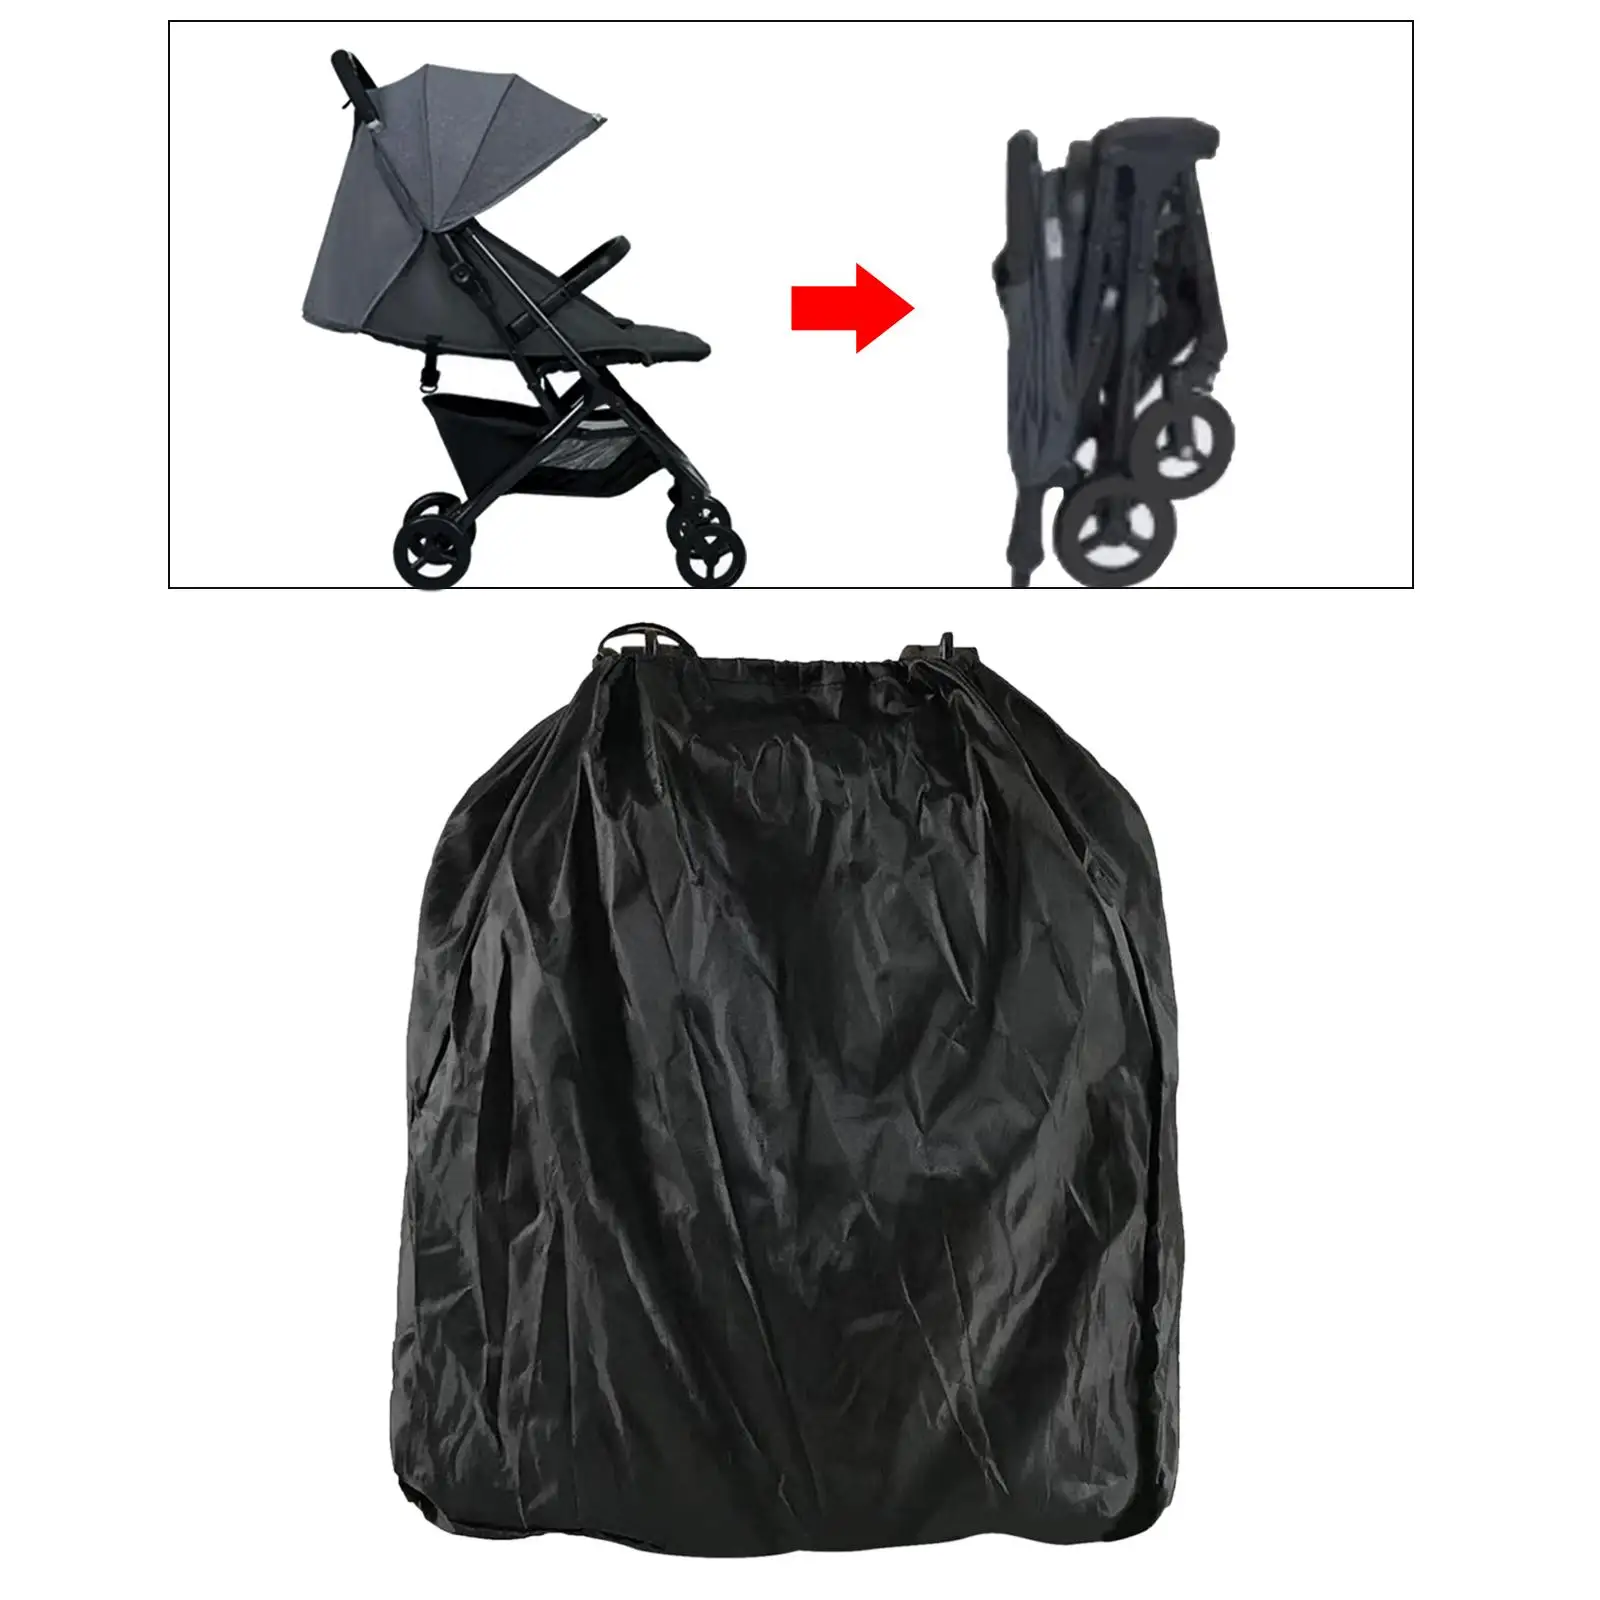 Air Travel Stroller Bag Carrying Oxford Cloth Drawstring Closure Stroller Storage Bag for Airports Gate Check Bag Airplane